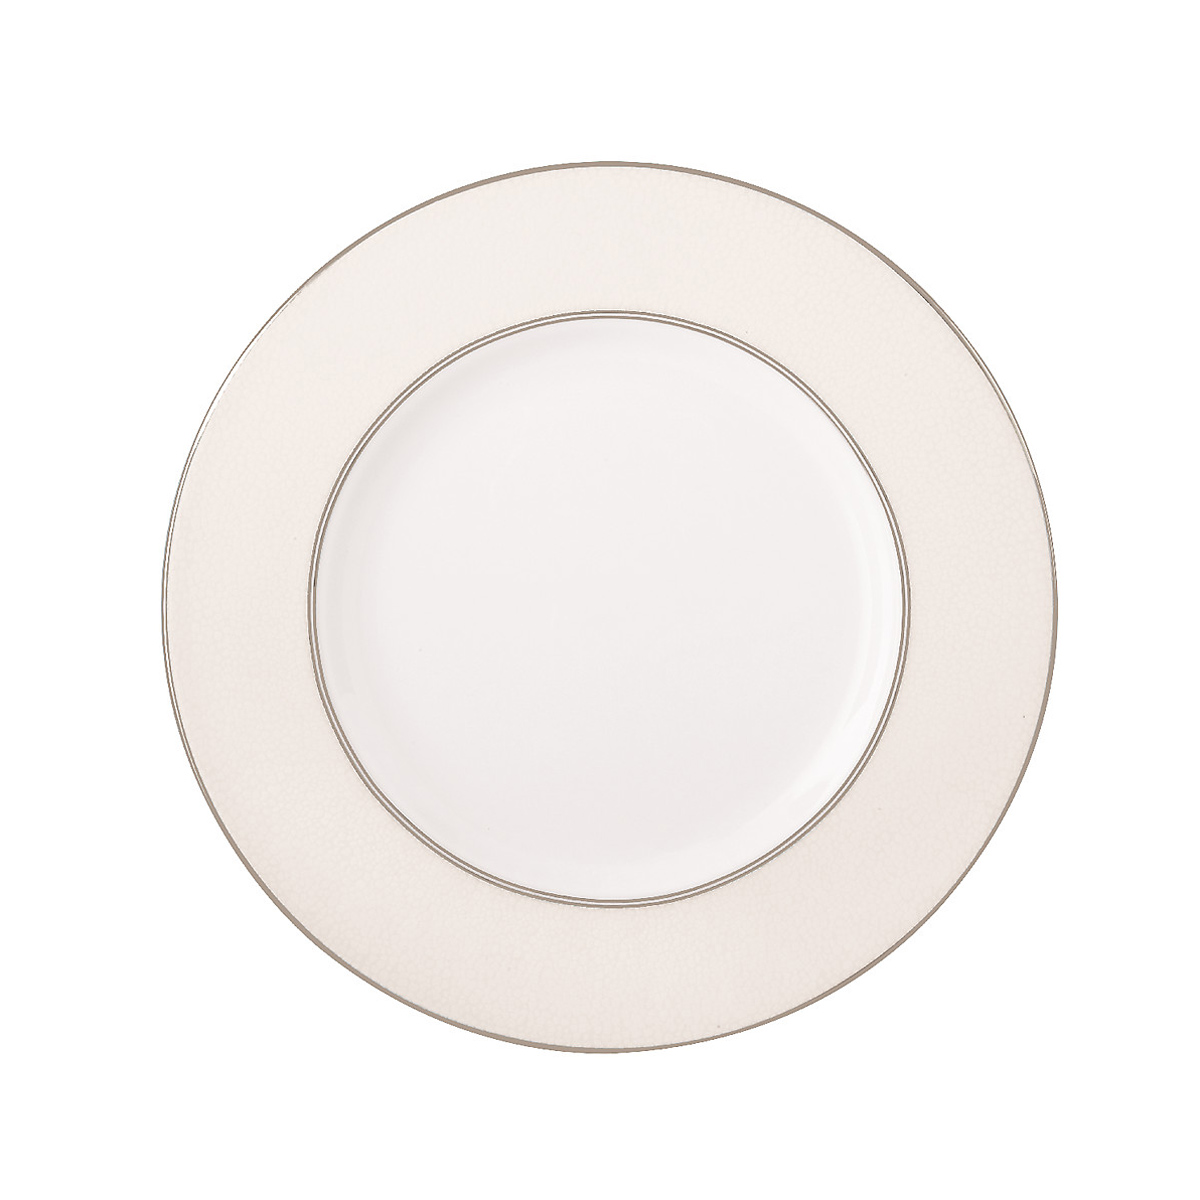 Kate Spade China by Lenox, Cypress Point Butter Plate